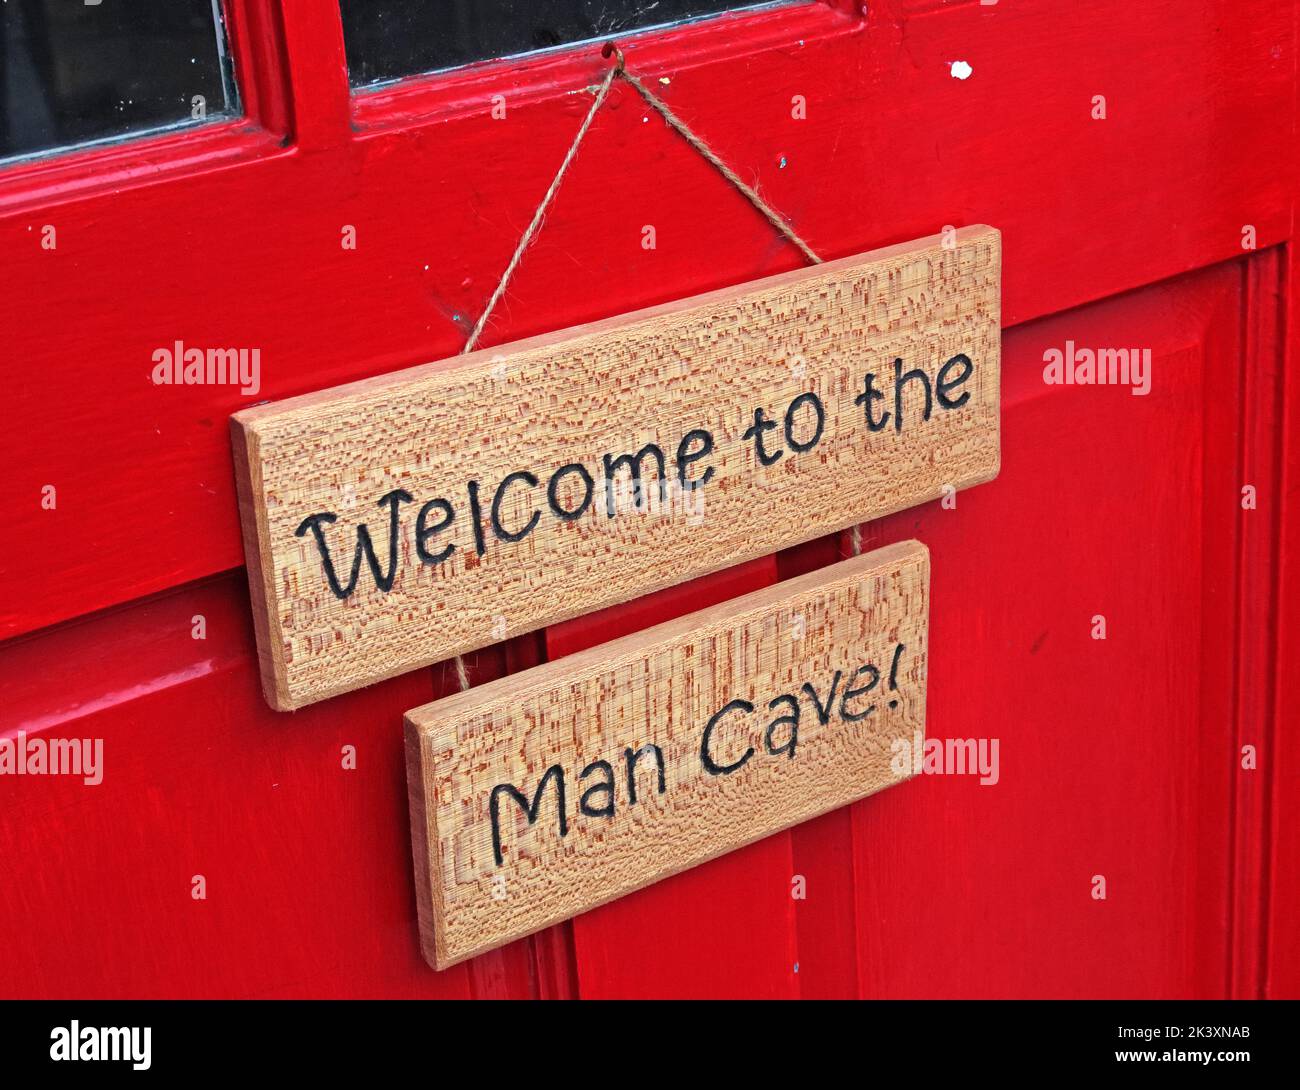 Welcome To The Man cave sign, on a red door Stock Photo